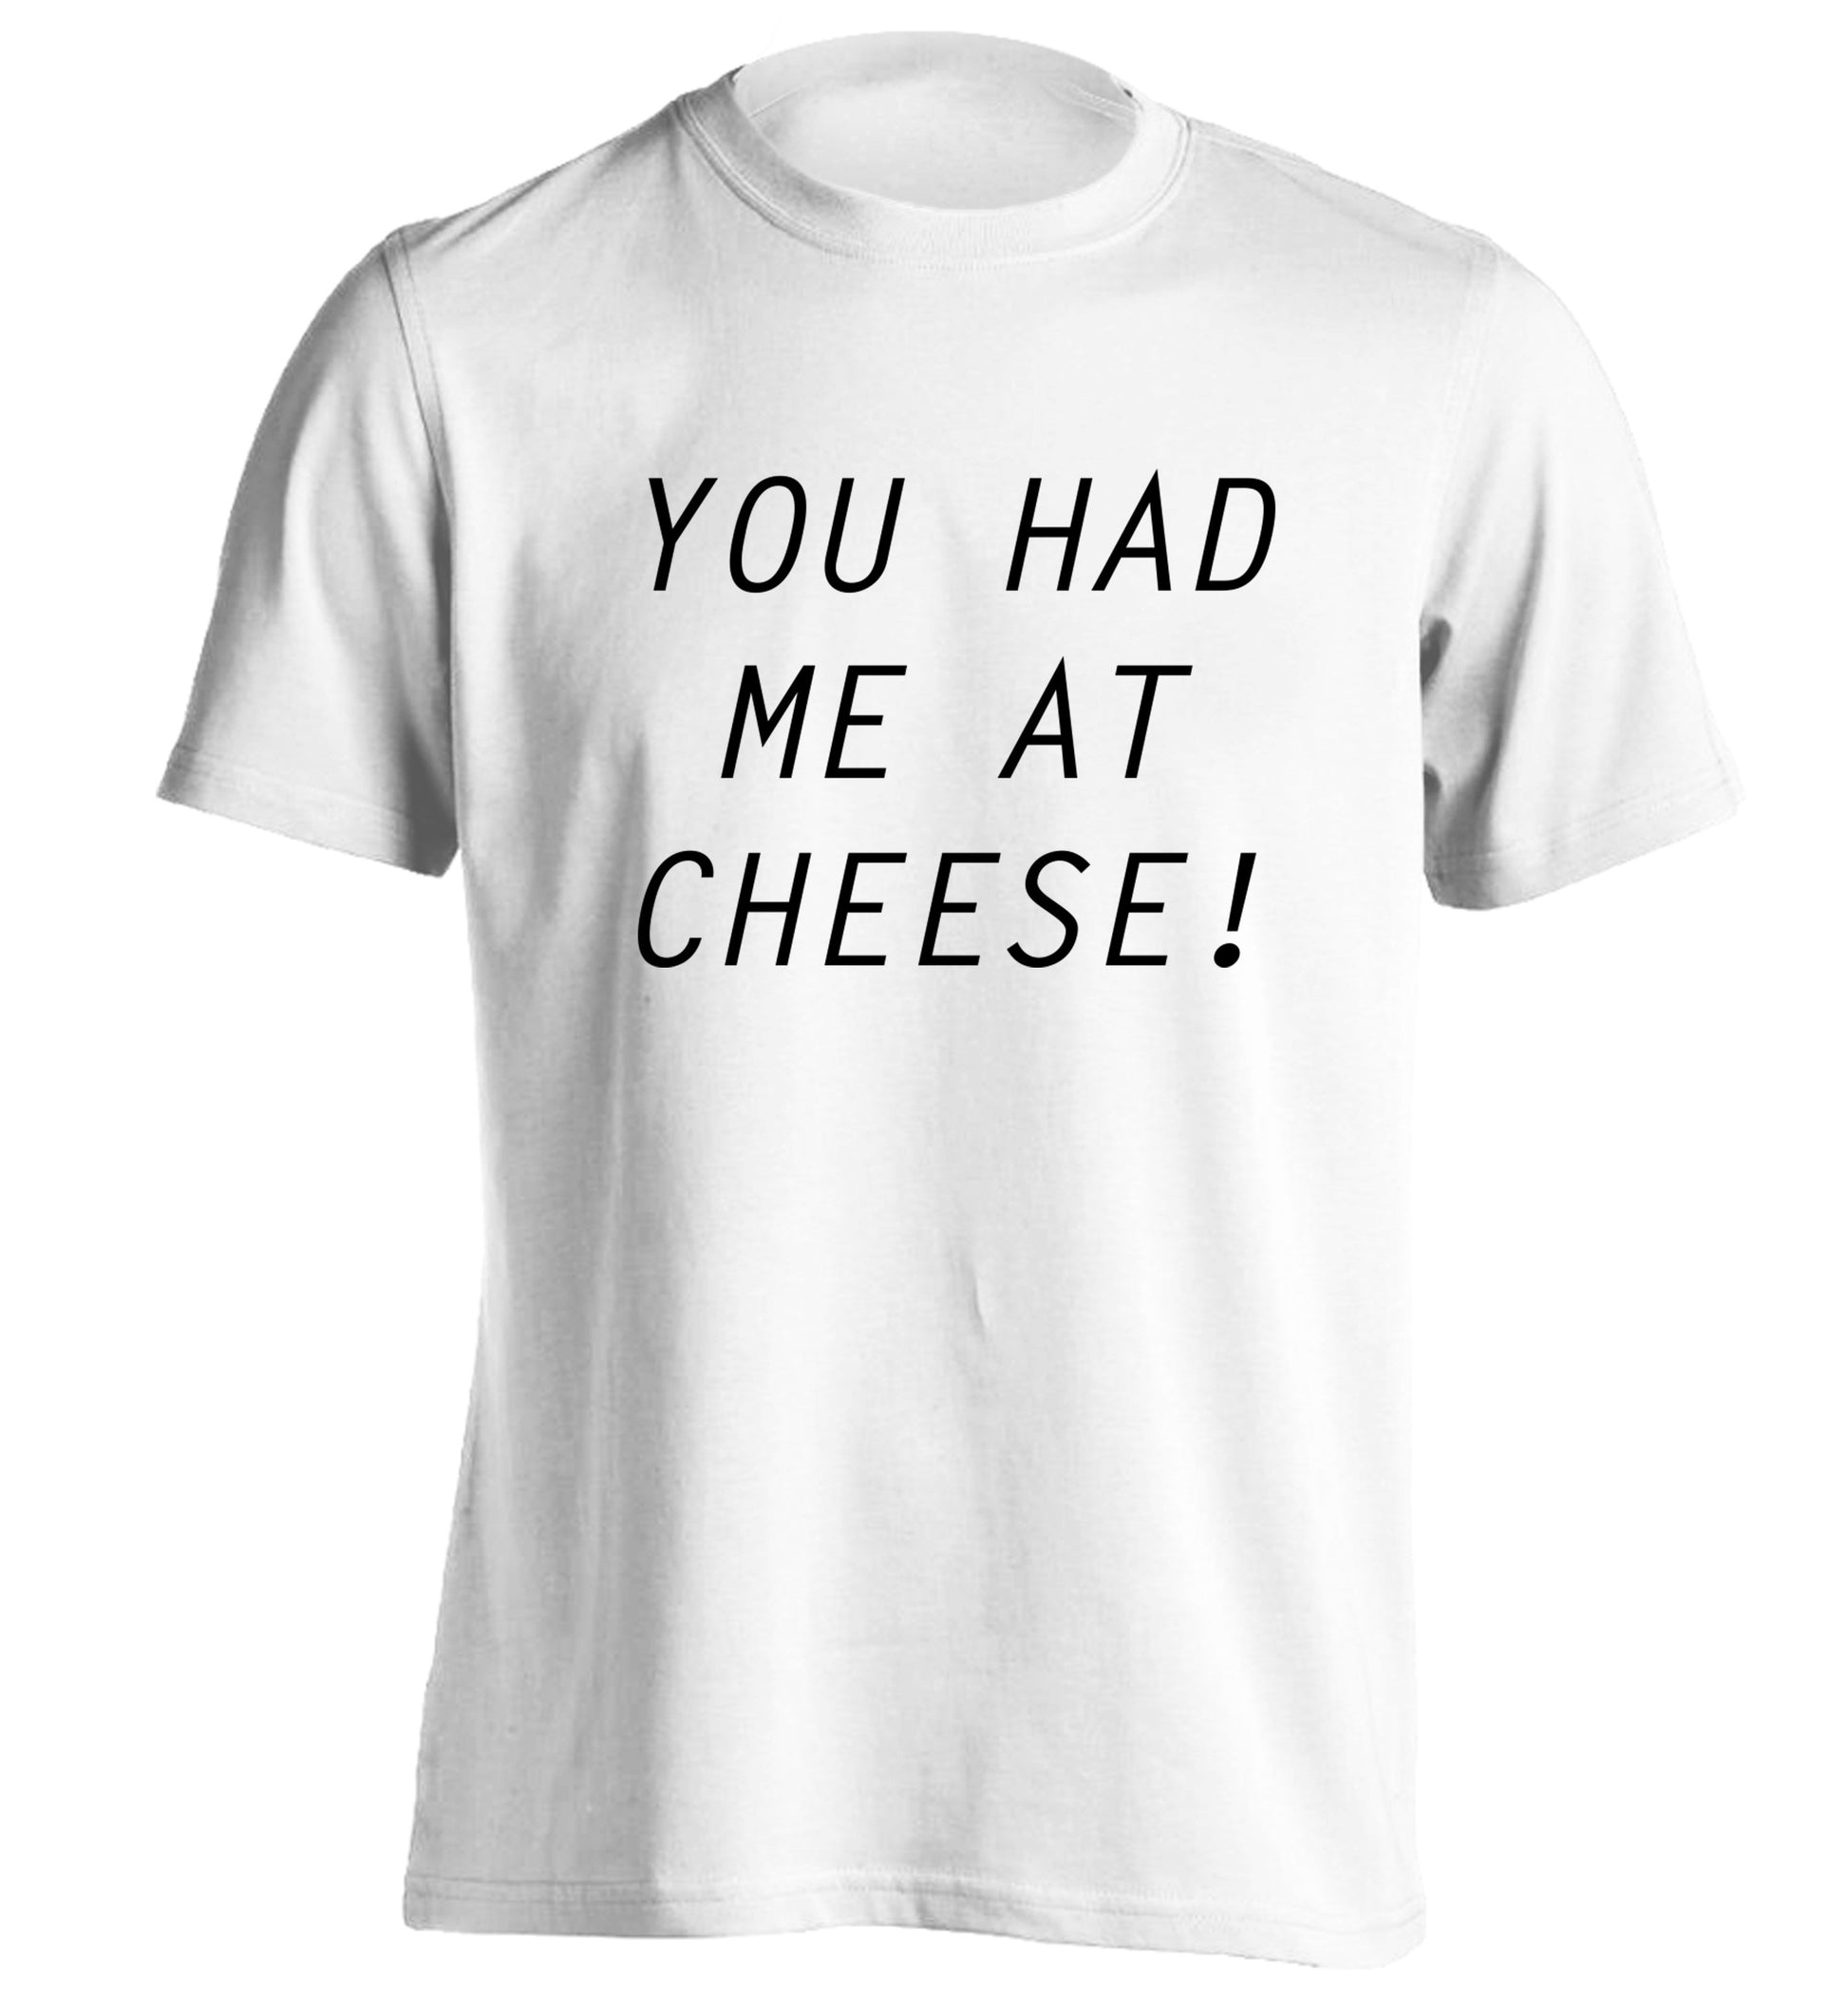 You had me at cheese adults unisex white Tshirt 2XL